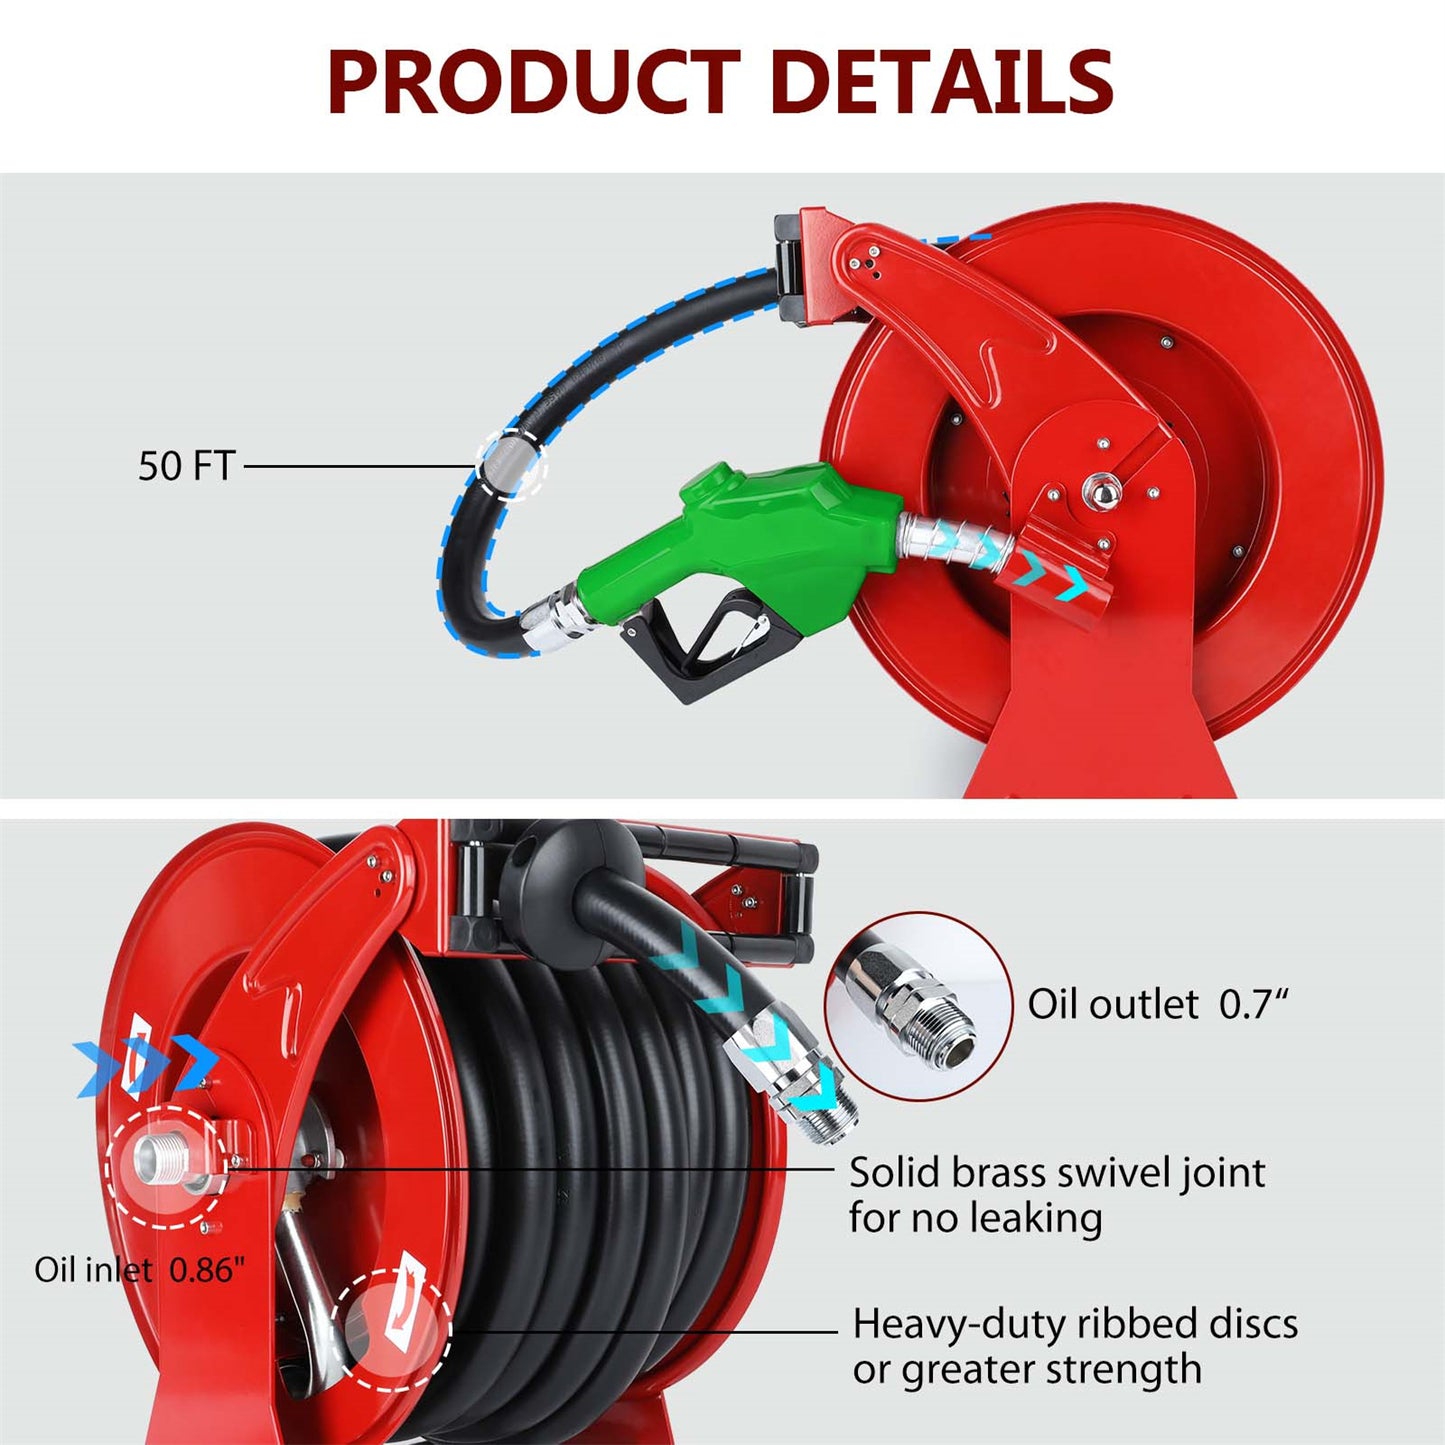 Retractable Diesel Fuel Hose Reel 1 x 50' with Fueling Nozzle for